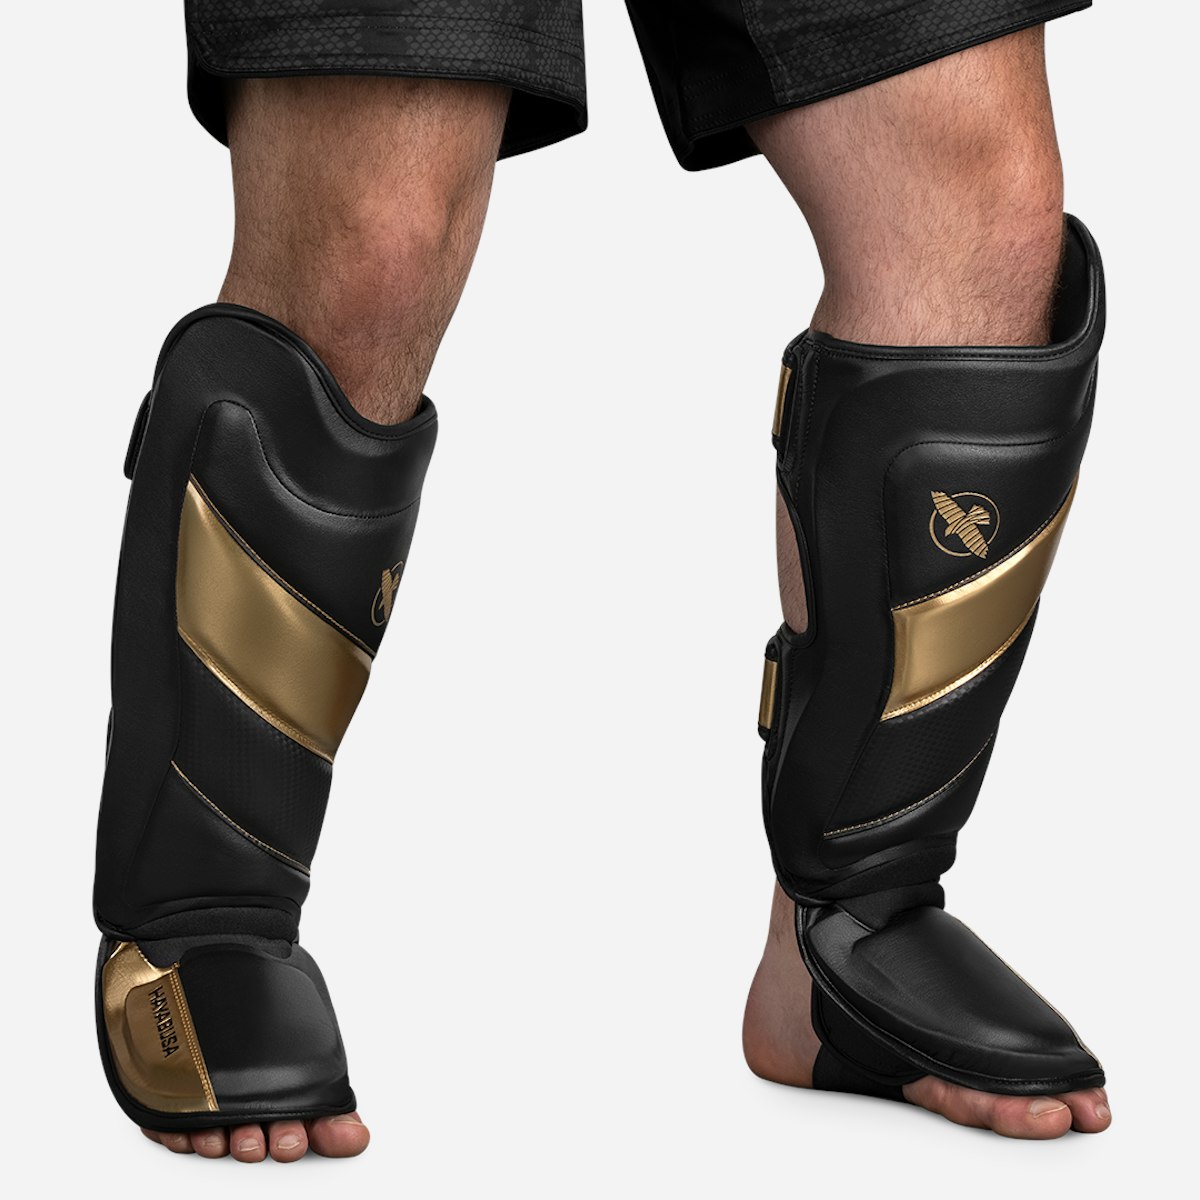 Carbon Athletic - The Gold Standard in Football Shin Guard